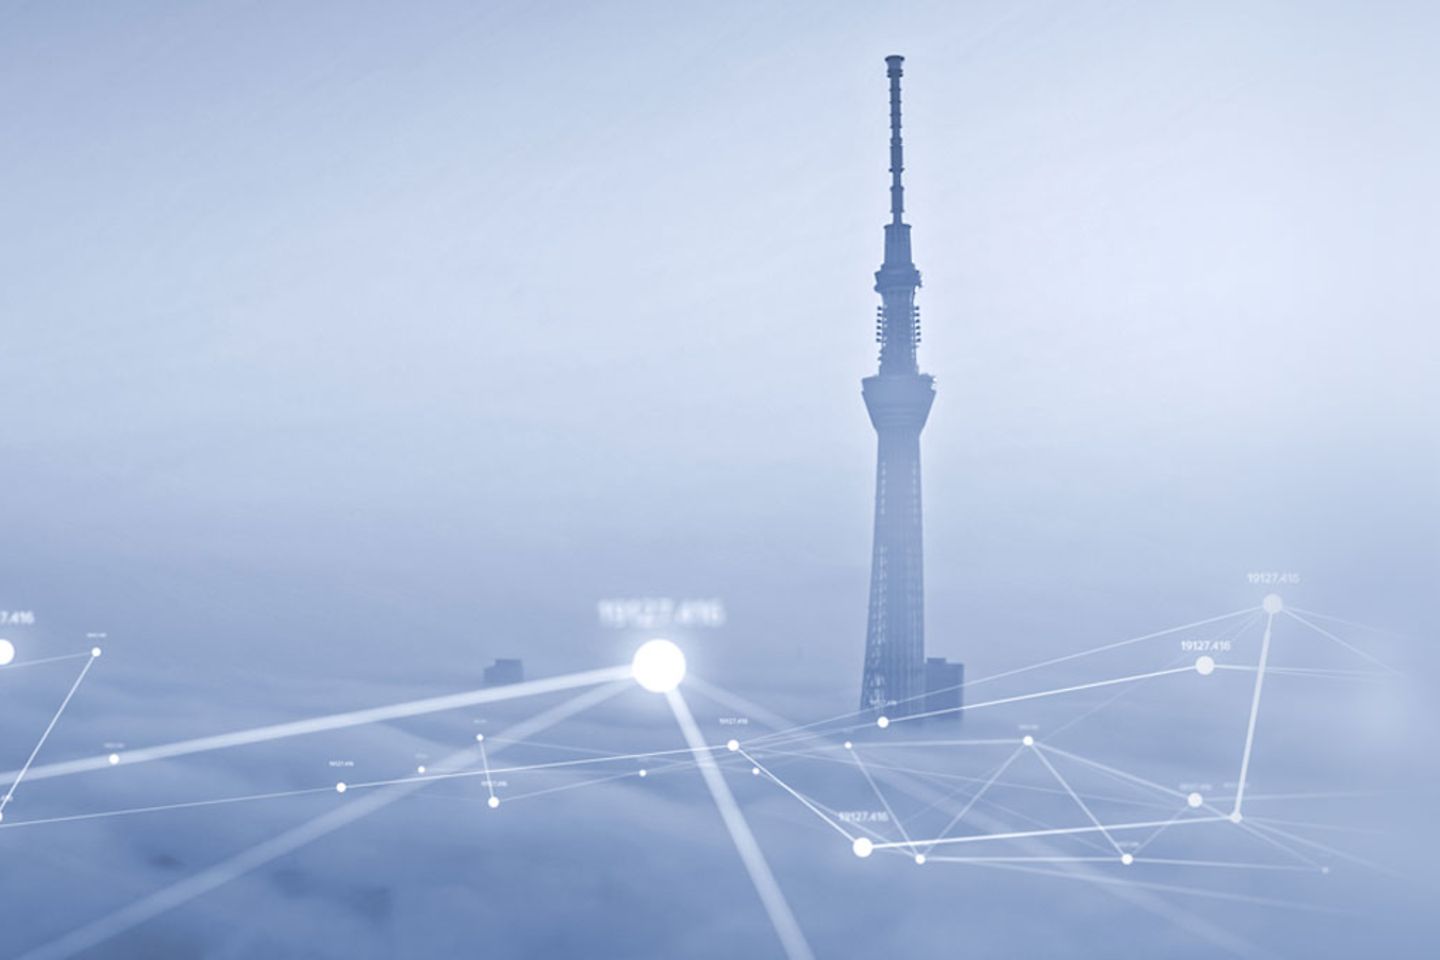 Tokyo tower in the clouds with network connections